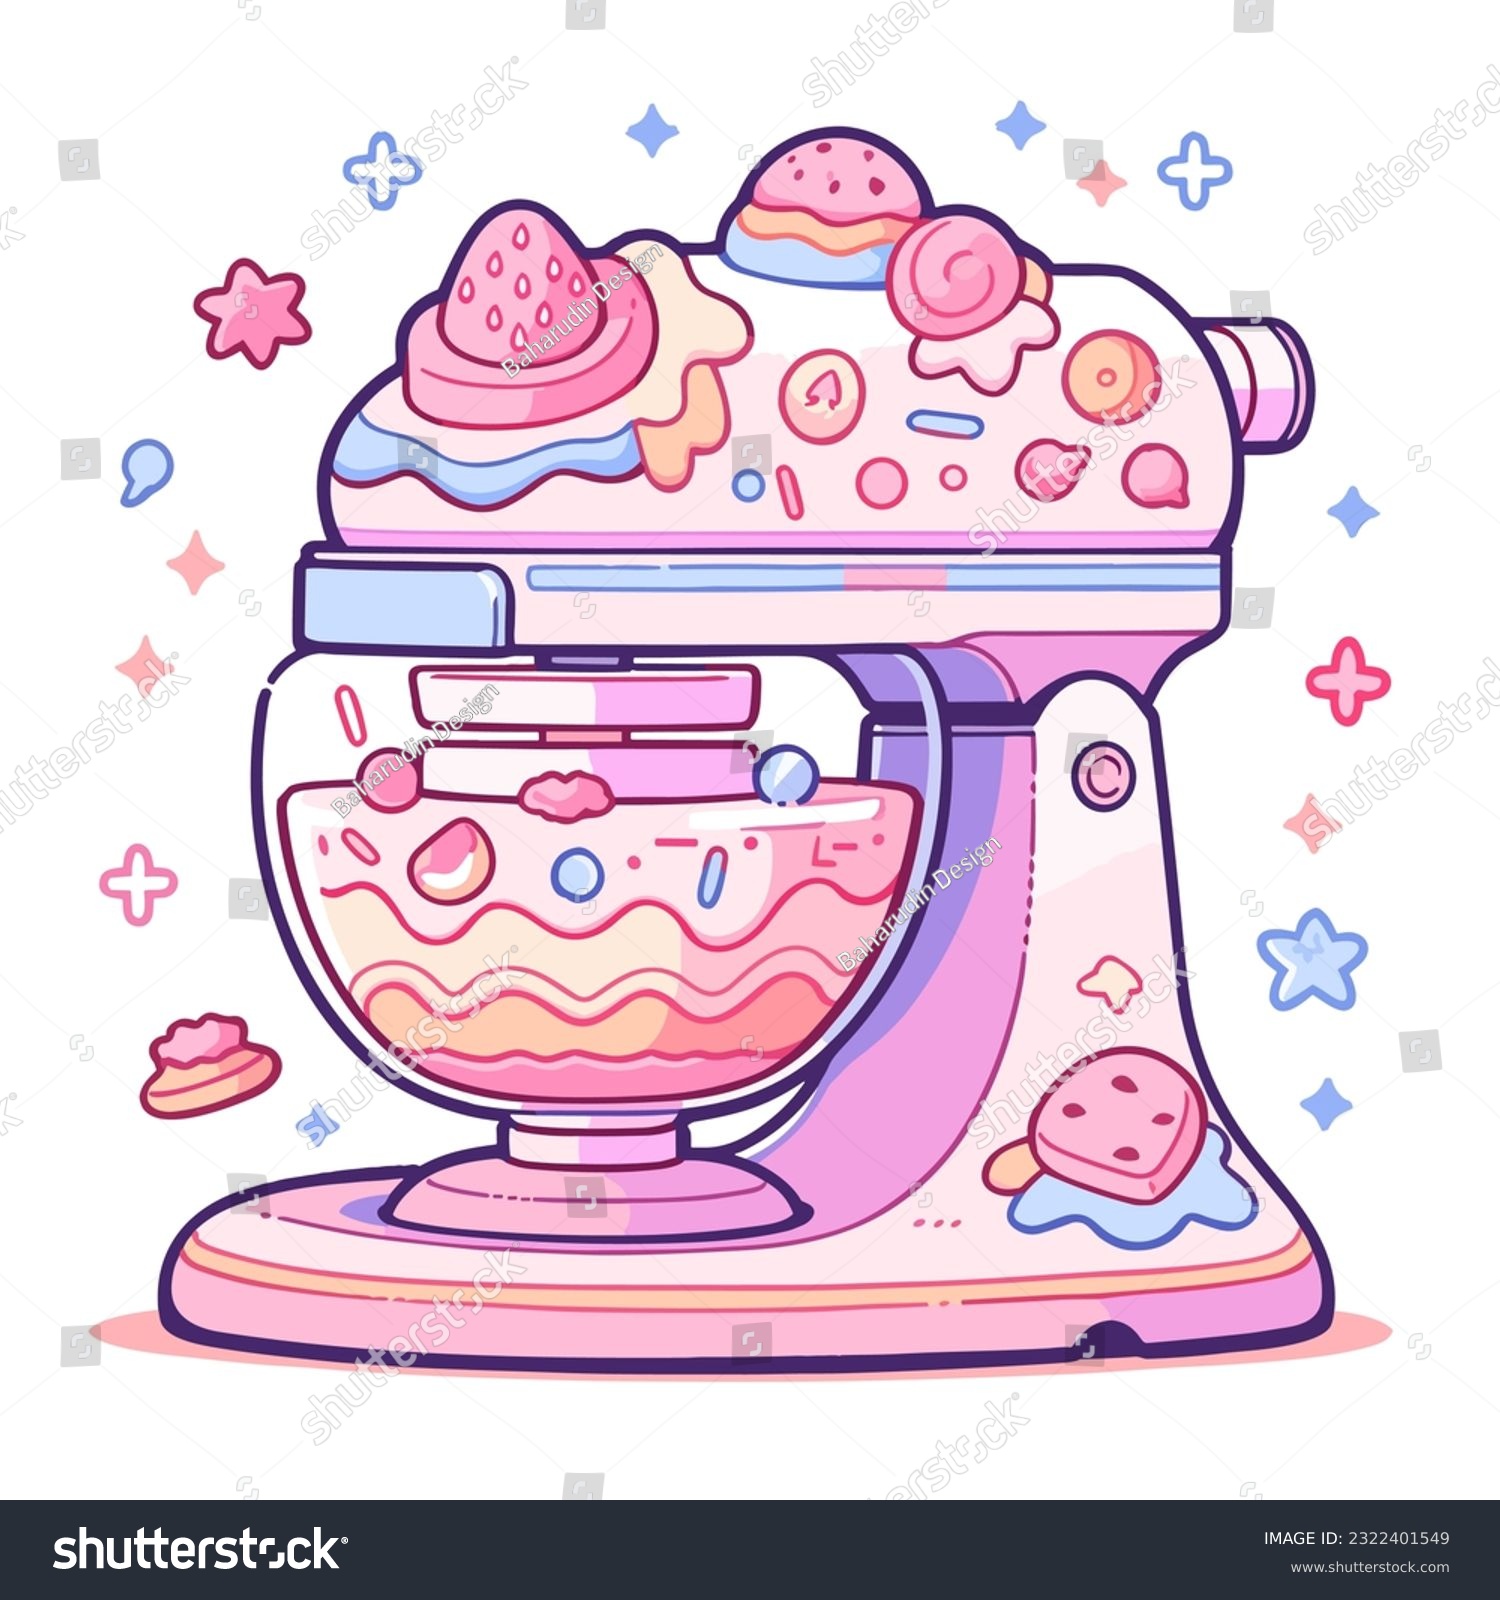 SVG of A cute cartoon mixer with a bowl of cake batter svg